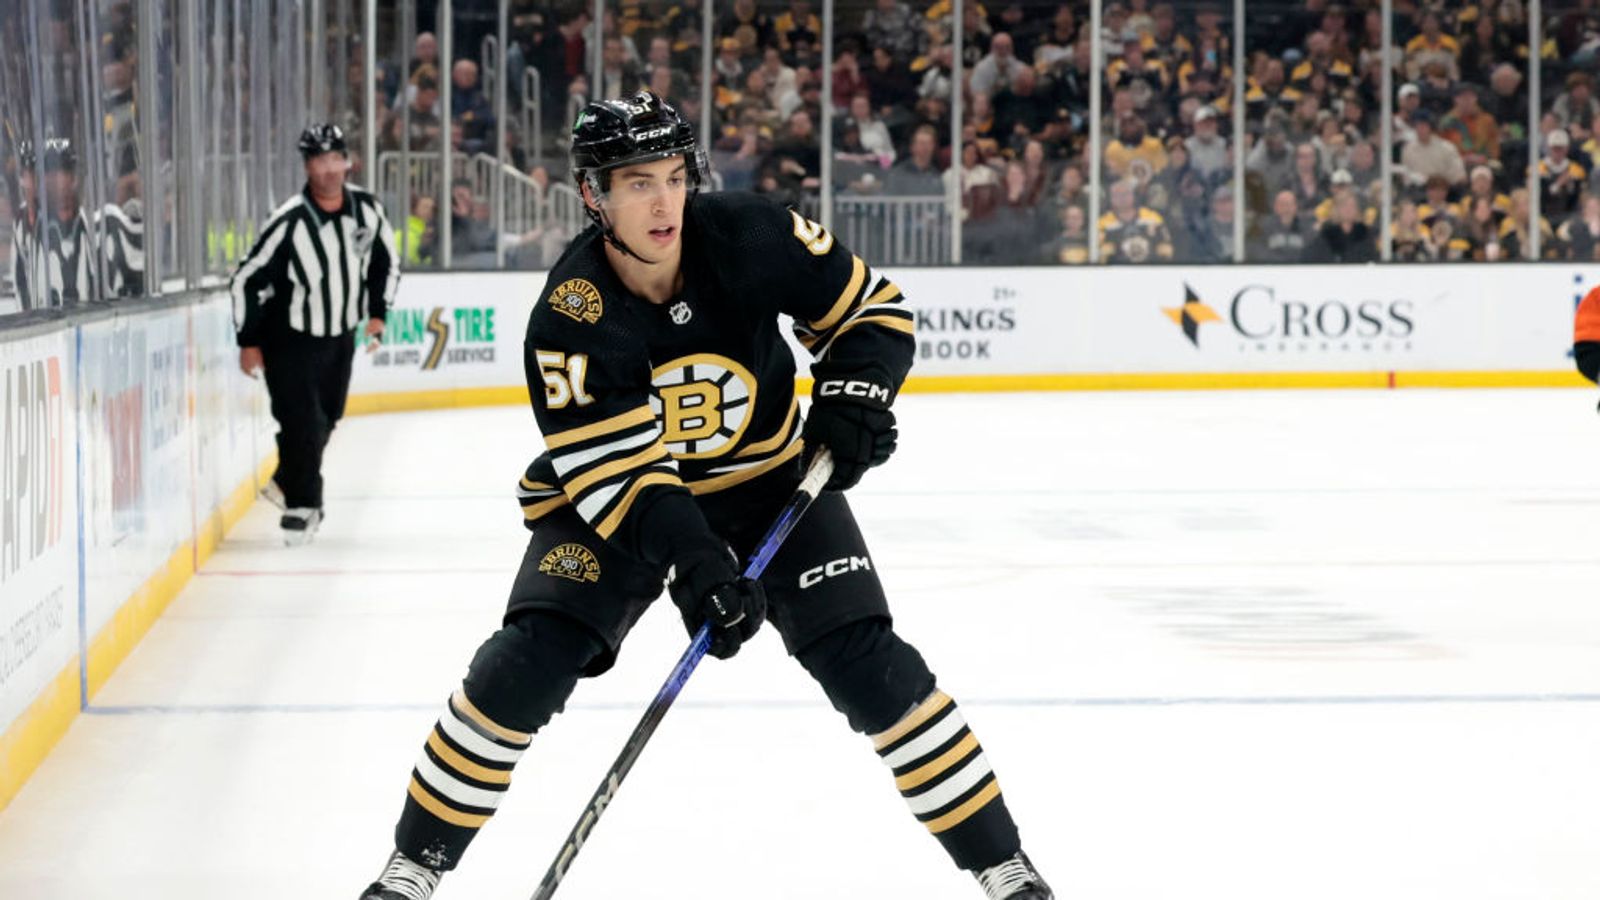 Donnelly: With the roster almost set, what will the Bruins